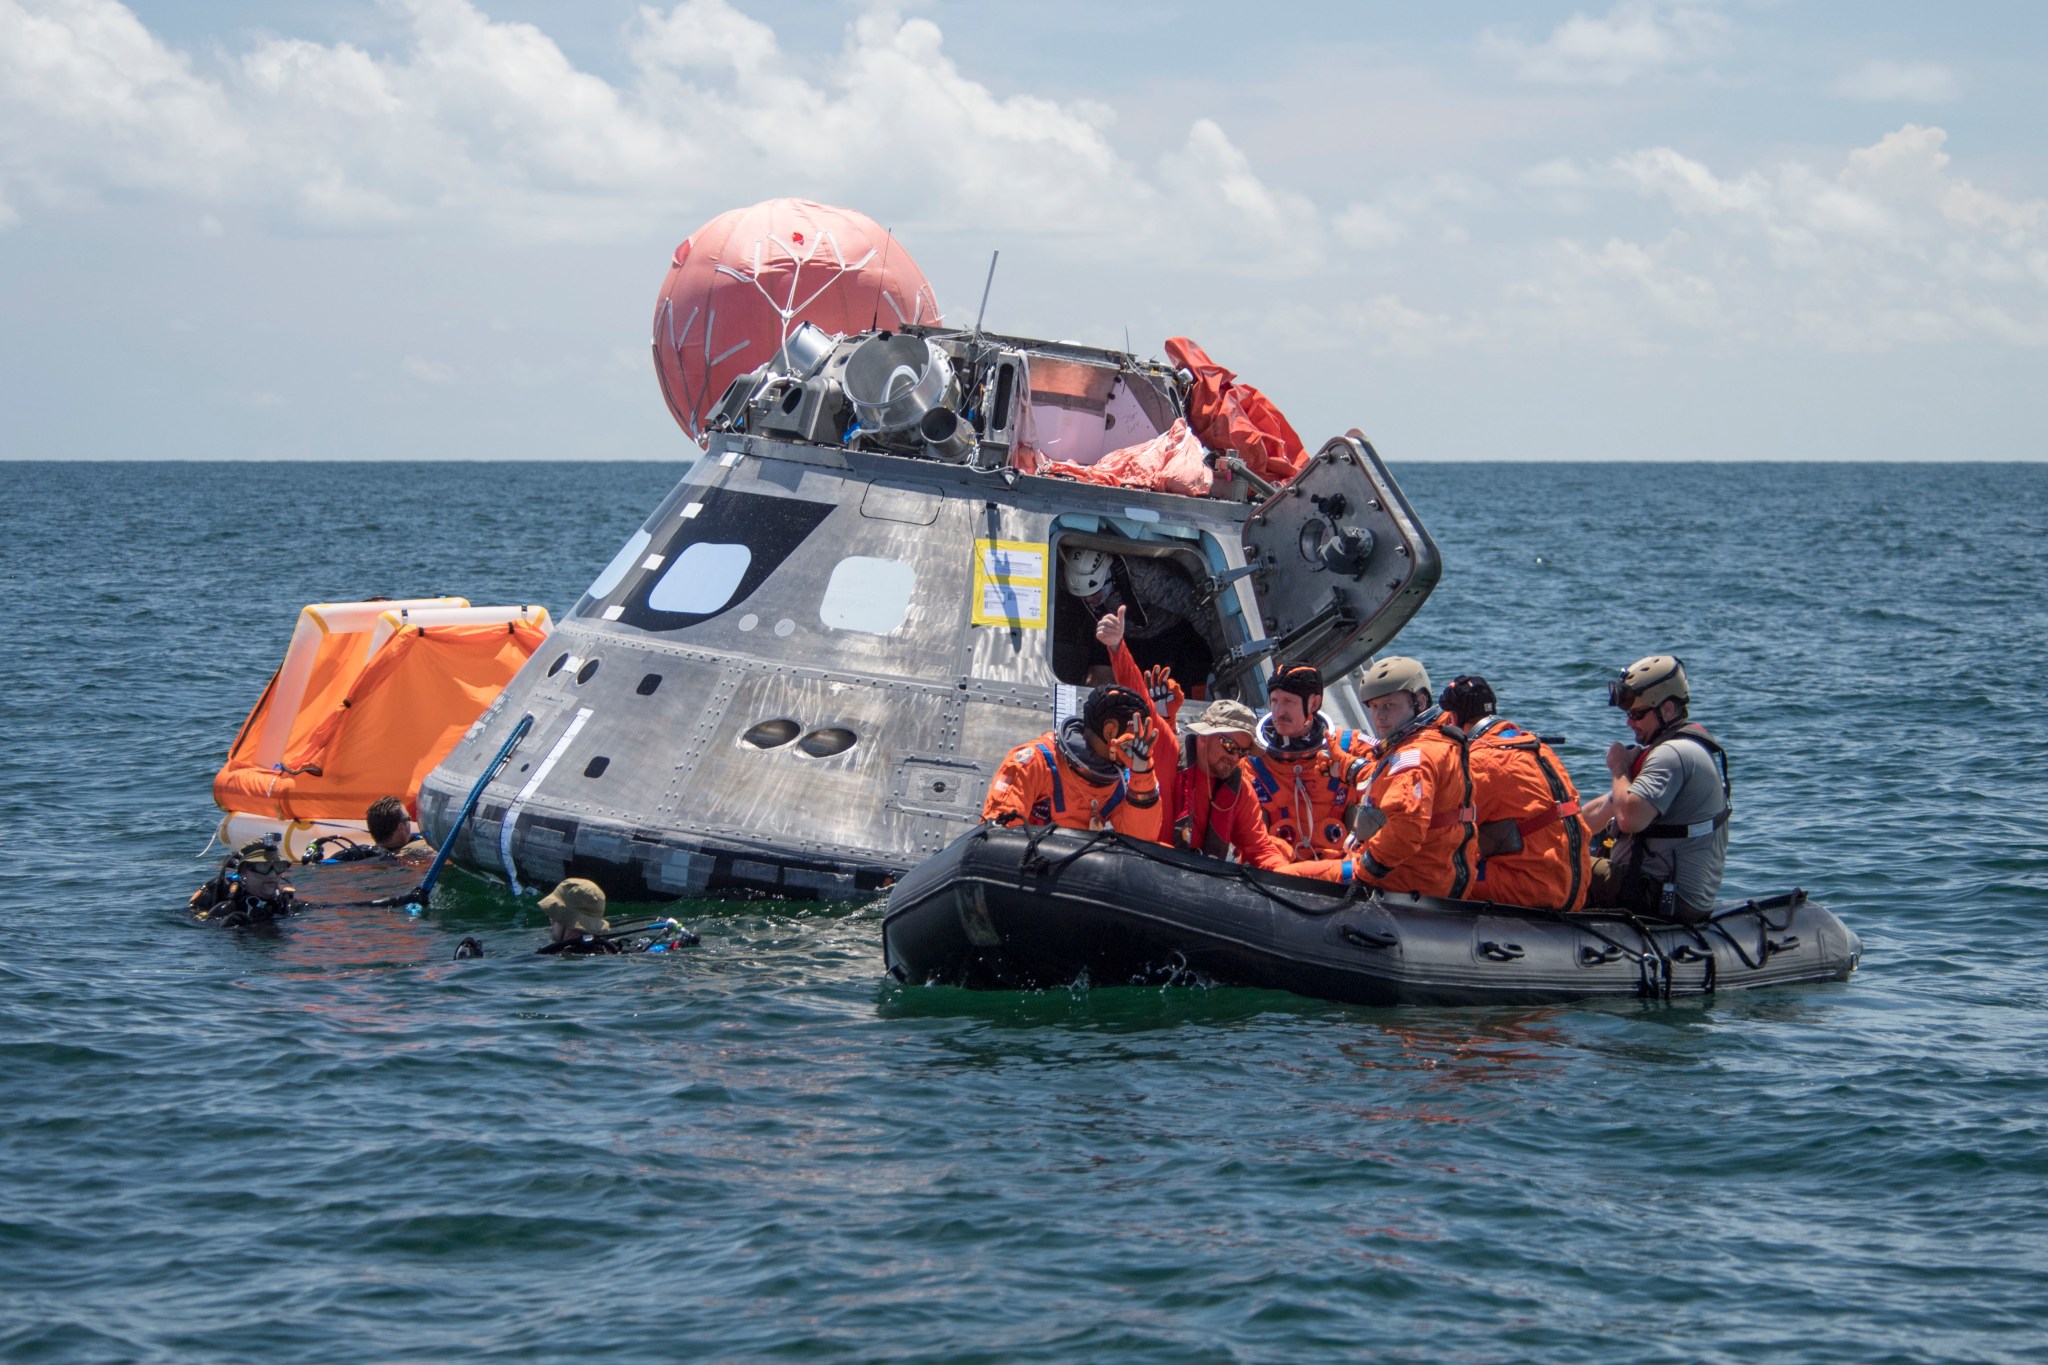 Orion capsule floats in sea with crew in orange flight suits in raft nearby